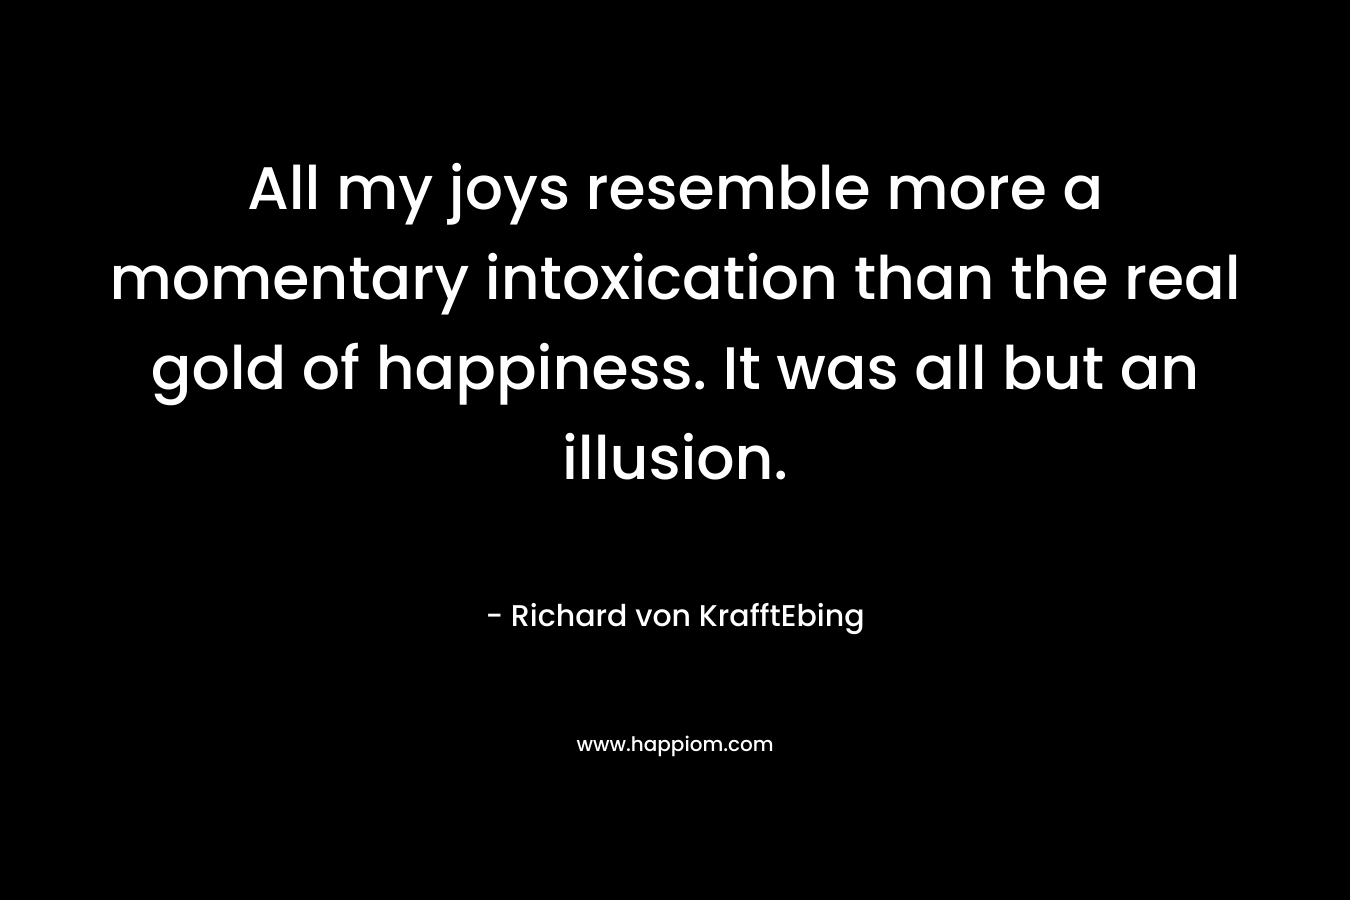 All my joys resemble more a momentary intoxication than the real gold of happiness. It was all but an illusion. – Richard von KrafftEbing